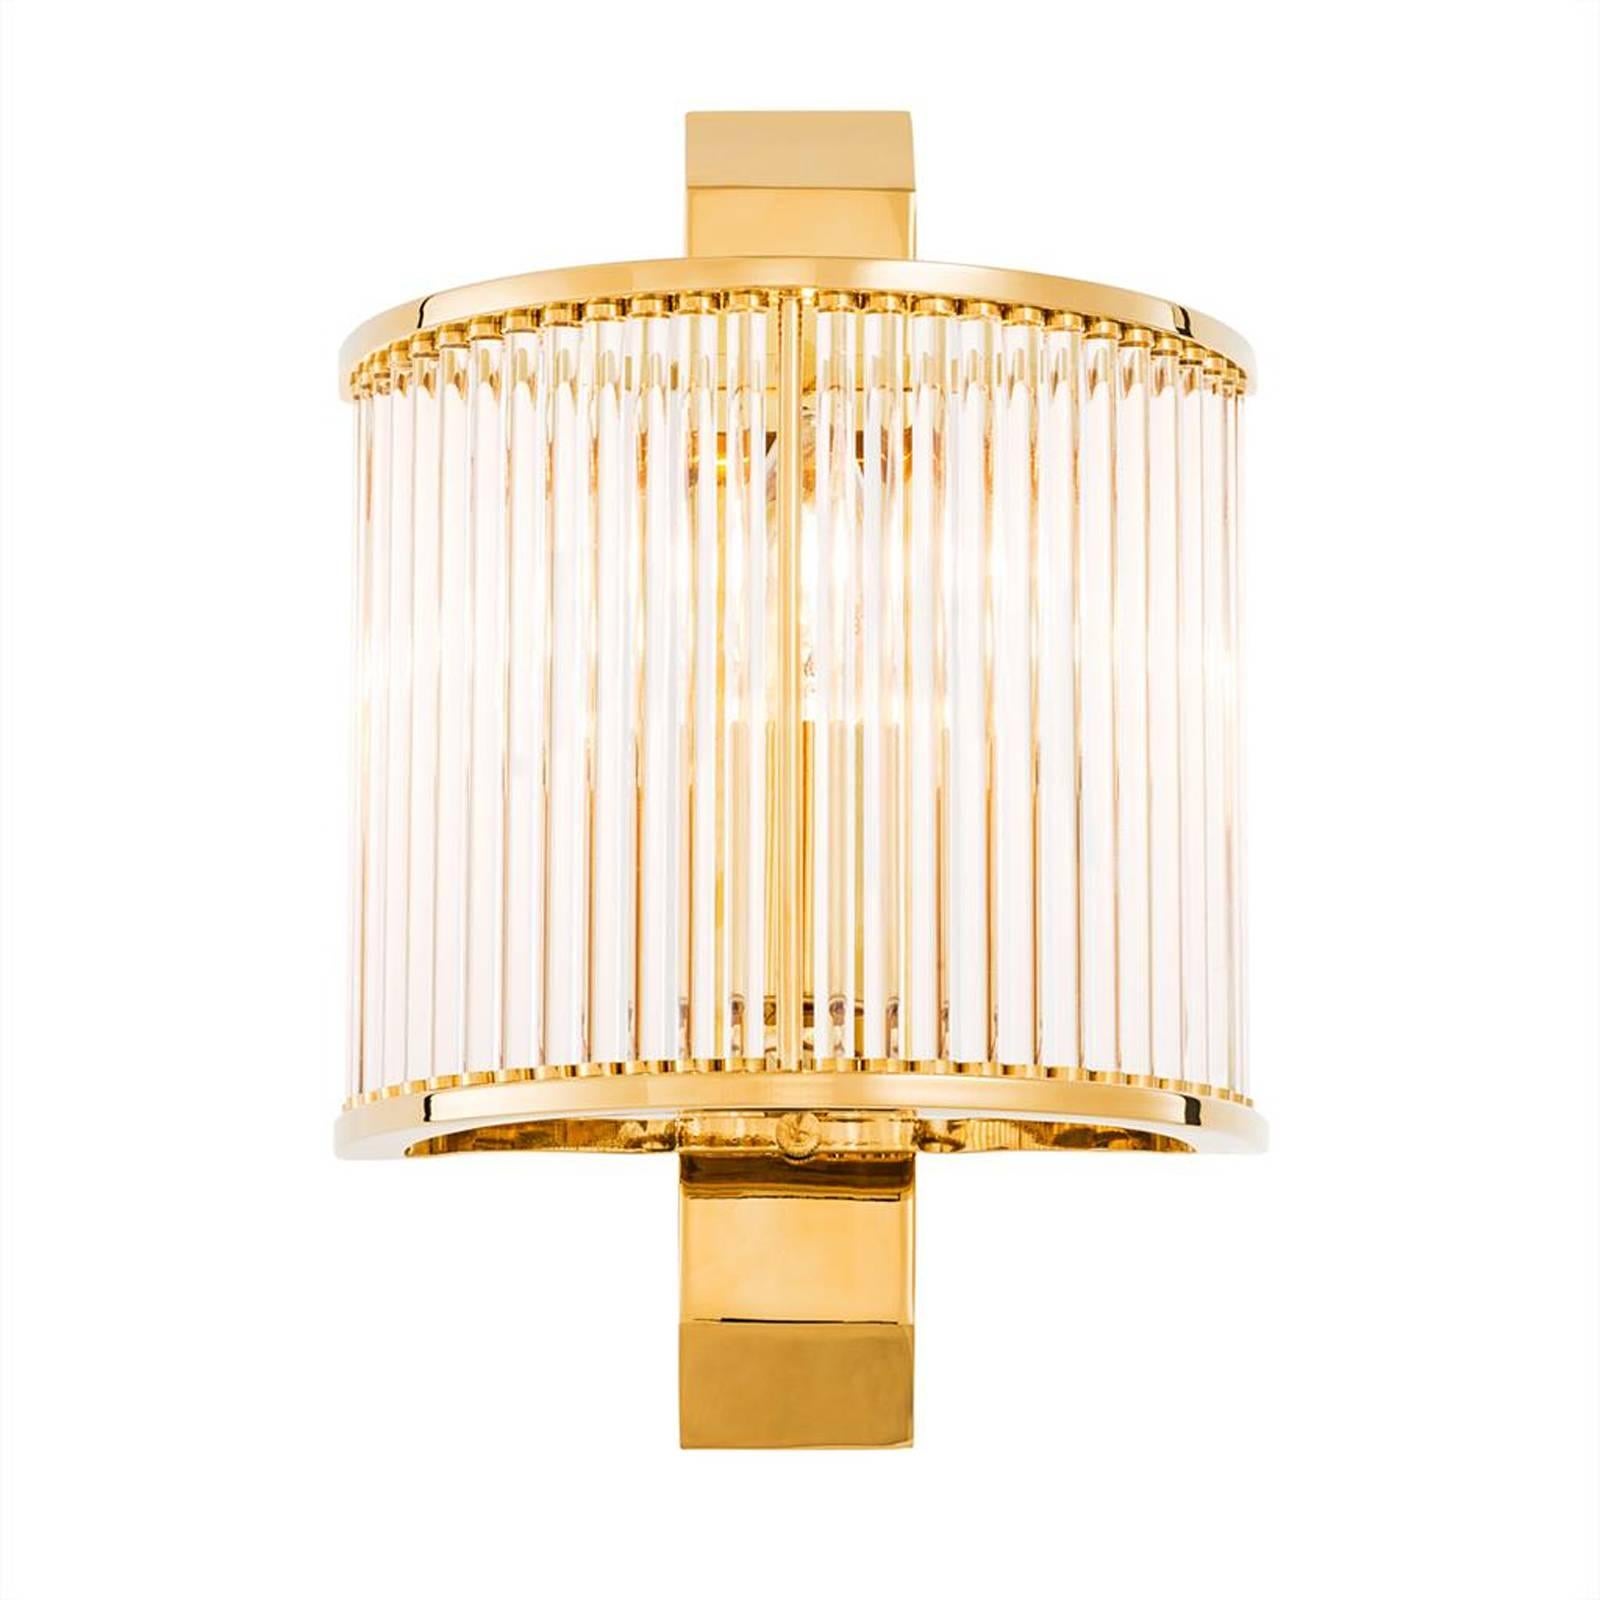 Chinese Grand Corridor Wall Lamp in Gold Finish or Polished Stainless Steel